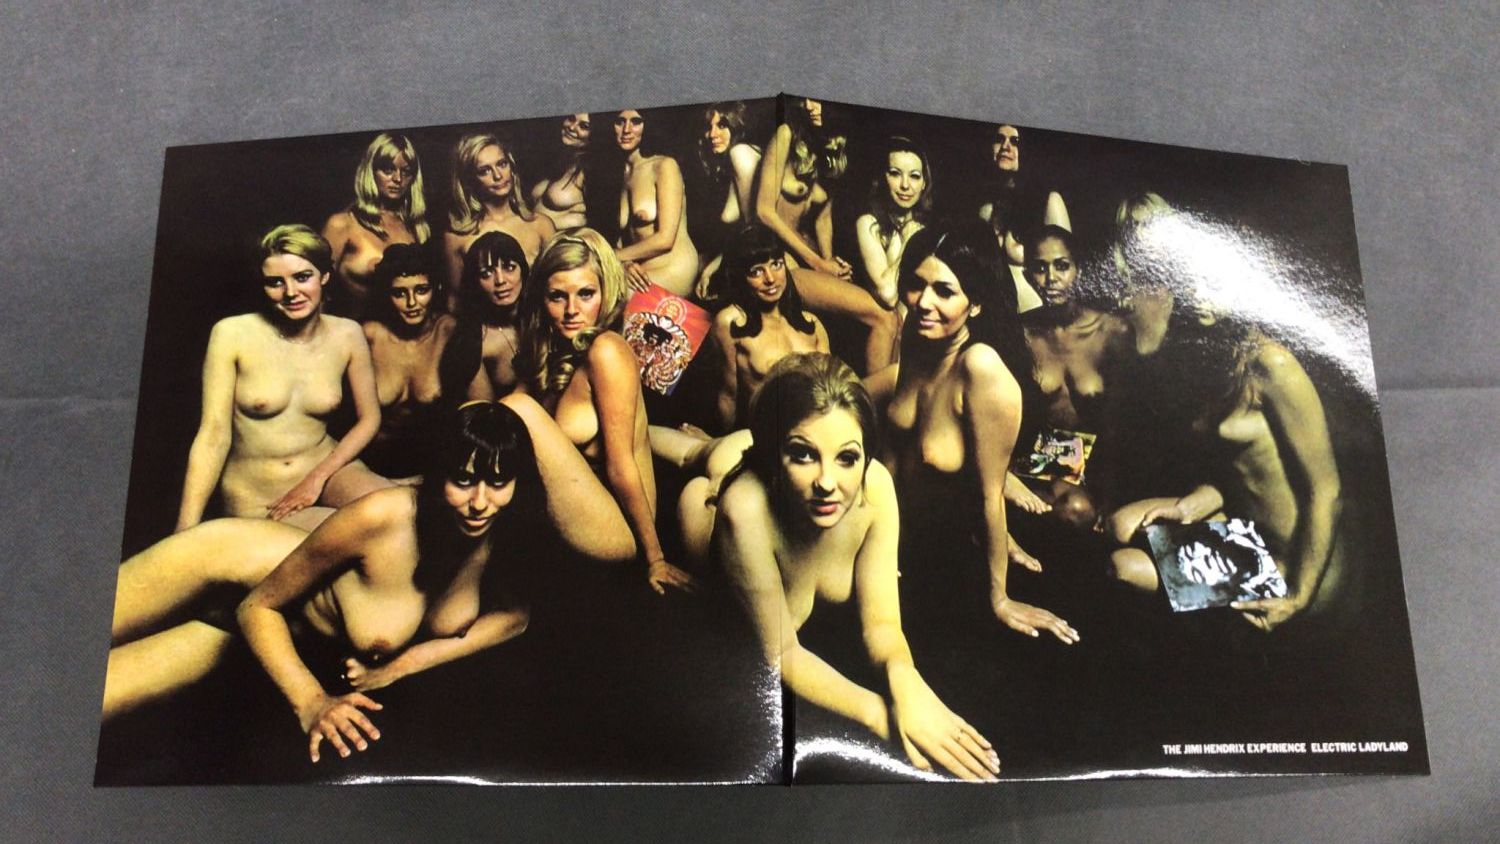 Jimi Hendrix - Electric Ladyland Unofficial re-issue (Track record 2657001) Cover and vinyl are - Image 3 of 3